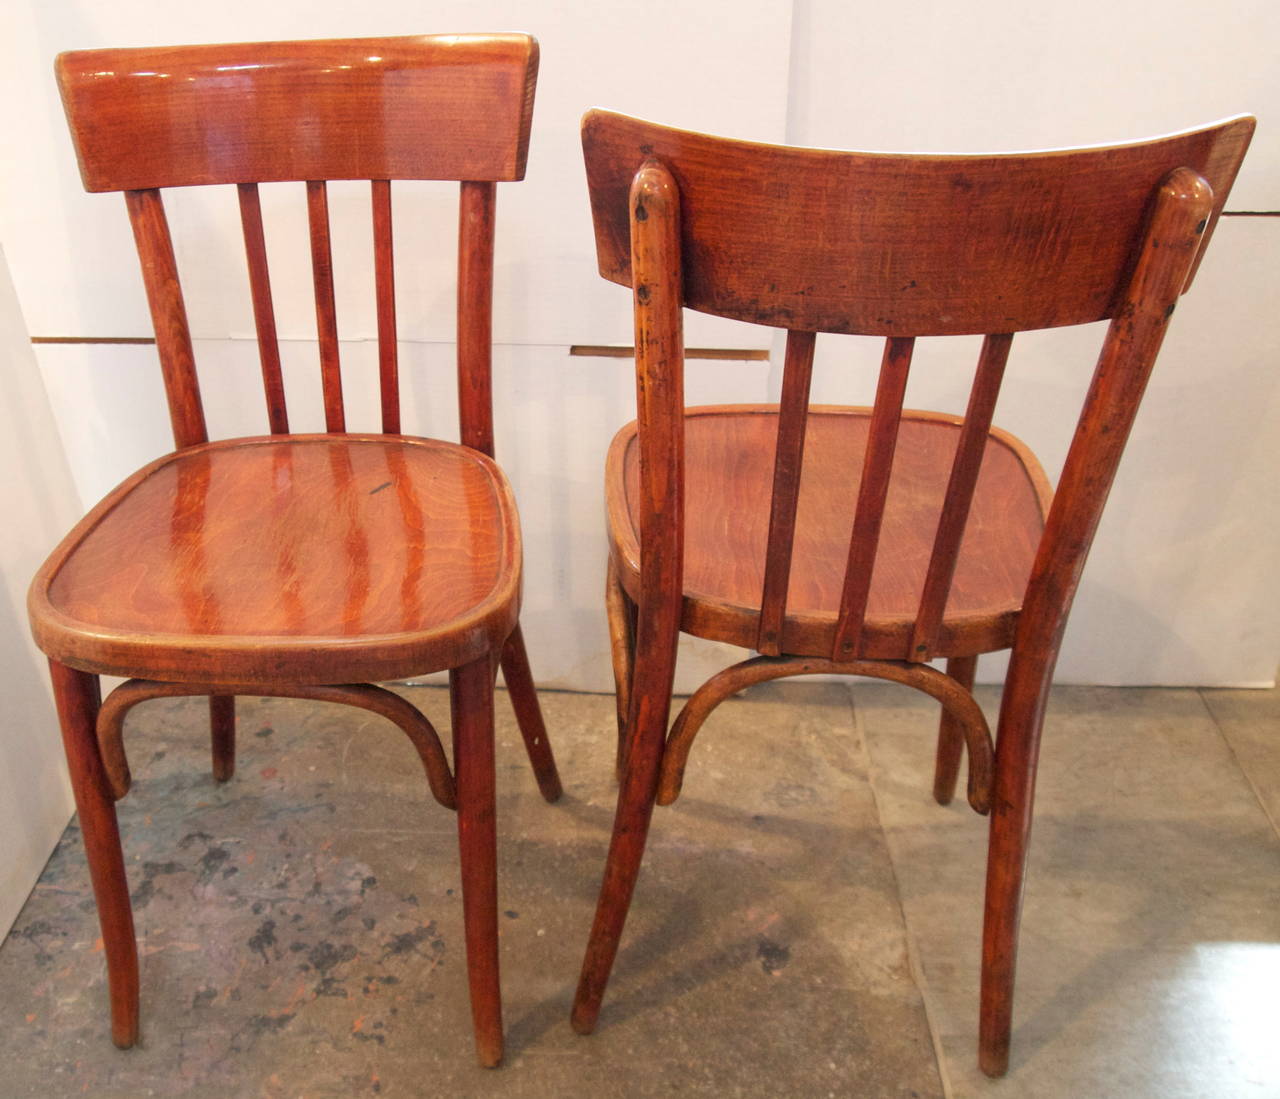 Set of 8 handsome French bentwood bistro chairs with nice proportions and color